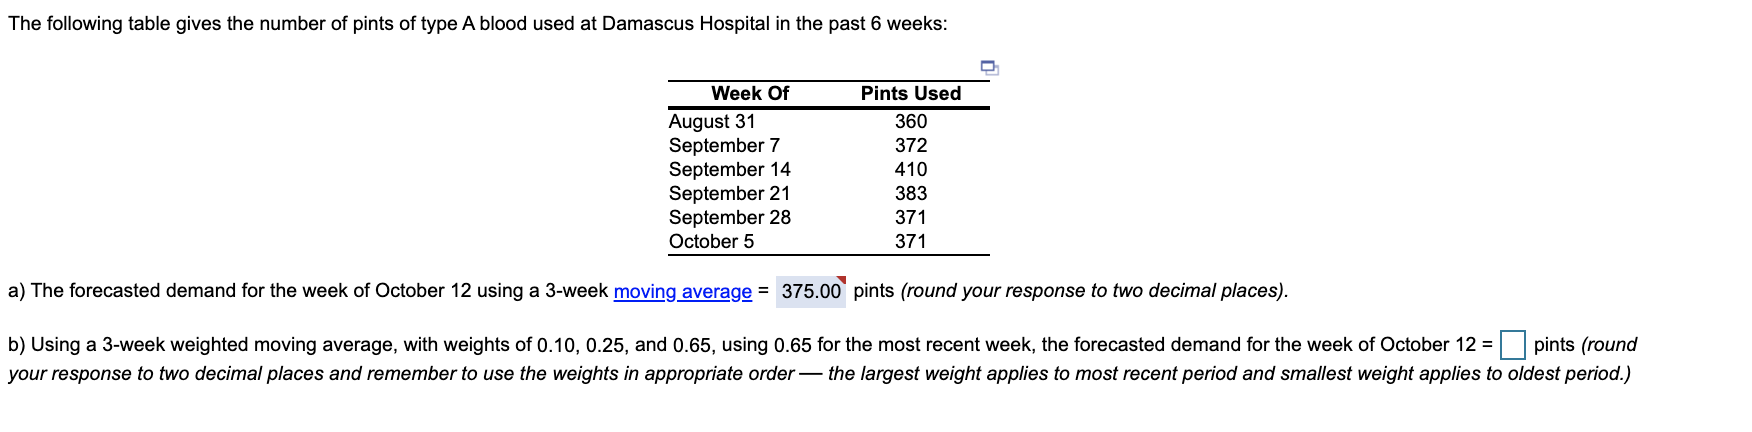 The following table gives the number of pints of type A blood used at Damascus Hospital in the past 6 weeks:
Week Of
Pints Used
August 31
September 7
September 14
September 21
September 28
October 5
360
372
410
383
371
371
a) The forecasted demand for the week of October 12 using a 3-week moving average = 375.00 pints (round your response to two decimal places).
b) Using a 3-week weighted moving average, with weights of 0.10, 0.25, and 0.65, using 0.65 for the most recent week, the forecasted demand for the week of October 12 =
pints (round
your response to two decimal places and remember to use the weights in appropriate order – the largest weight applies to most recent period and smallest weight applies to oldest period.)
